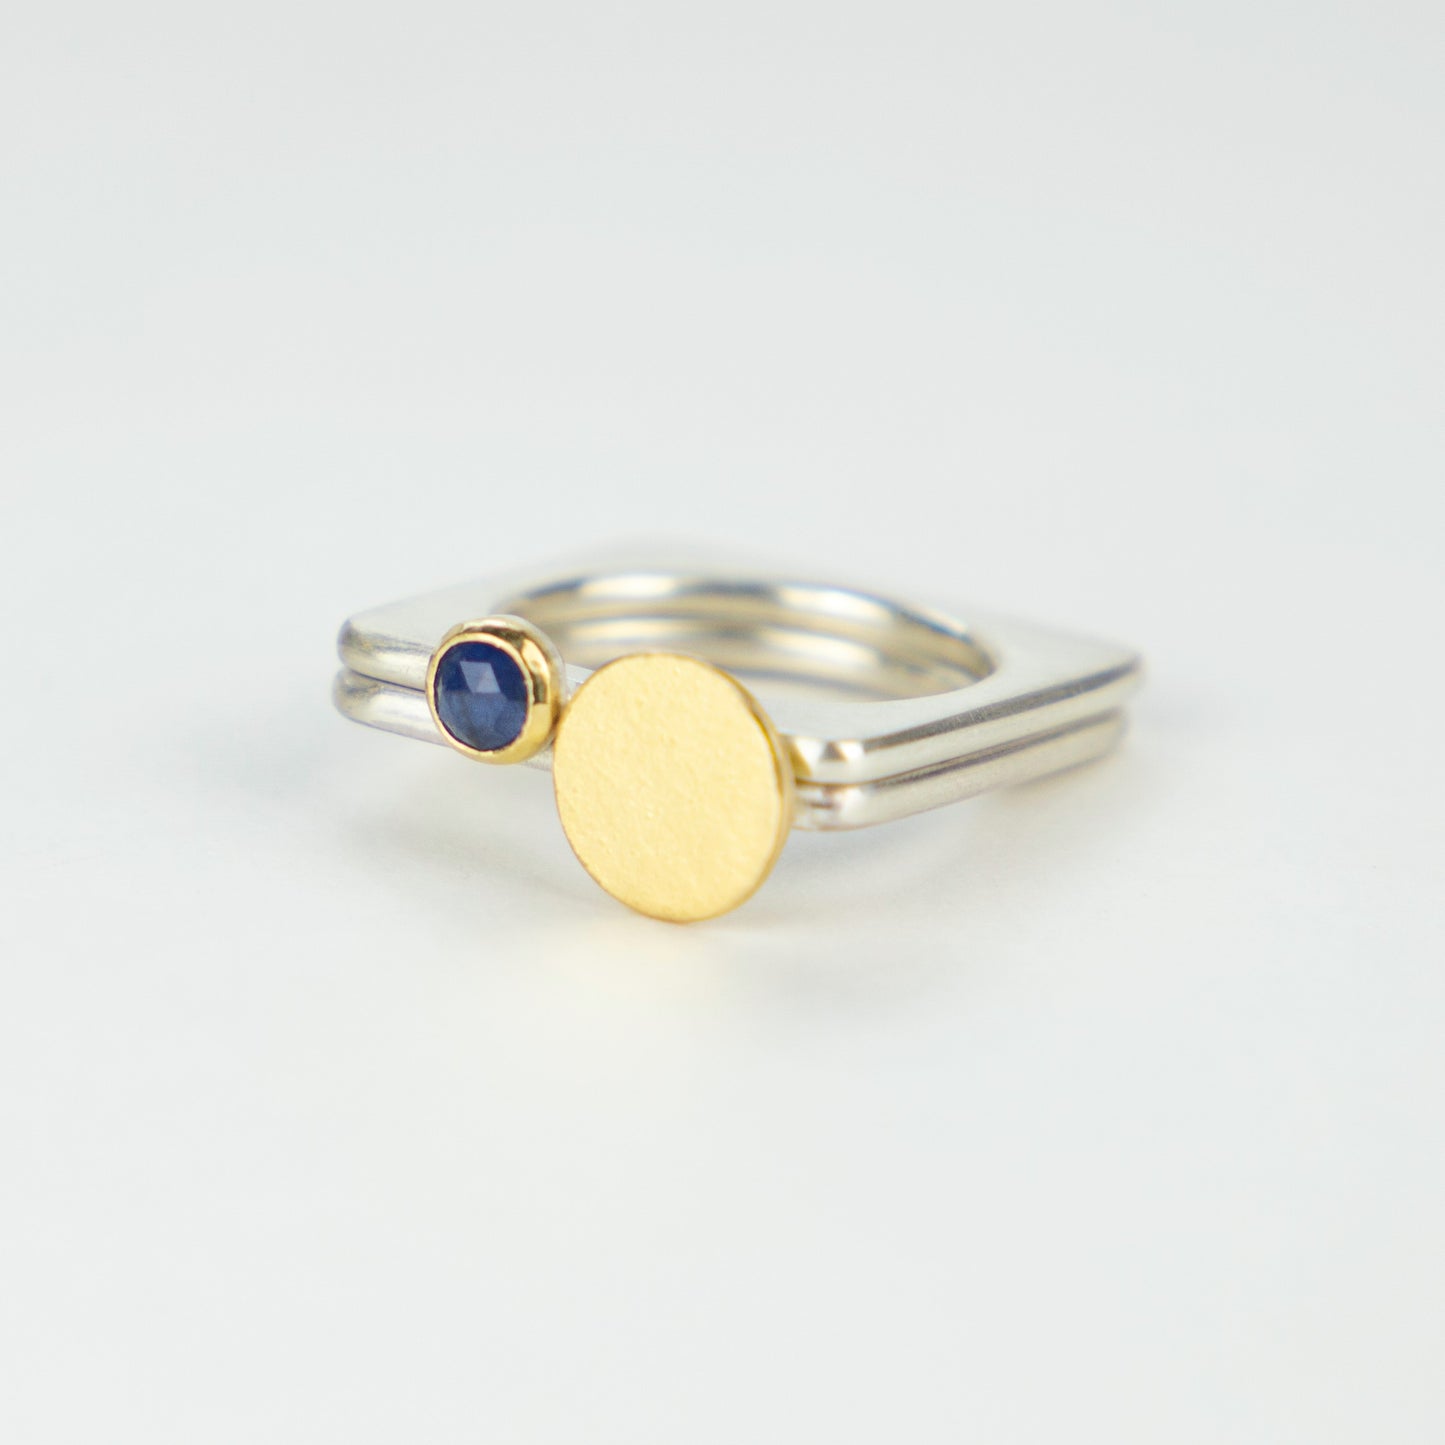 A square silver ring with a rich blue rosecut sapphire set in gold.